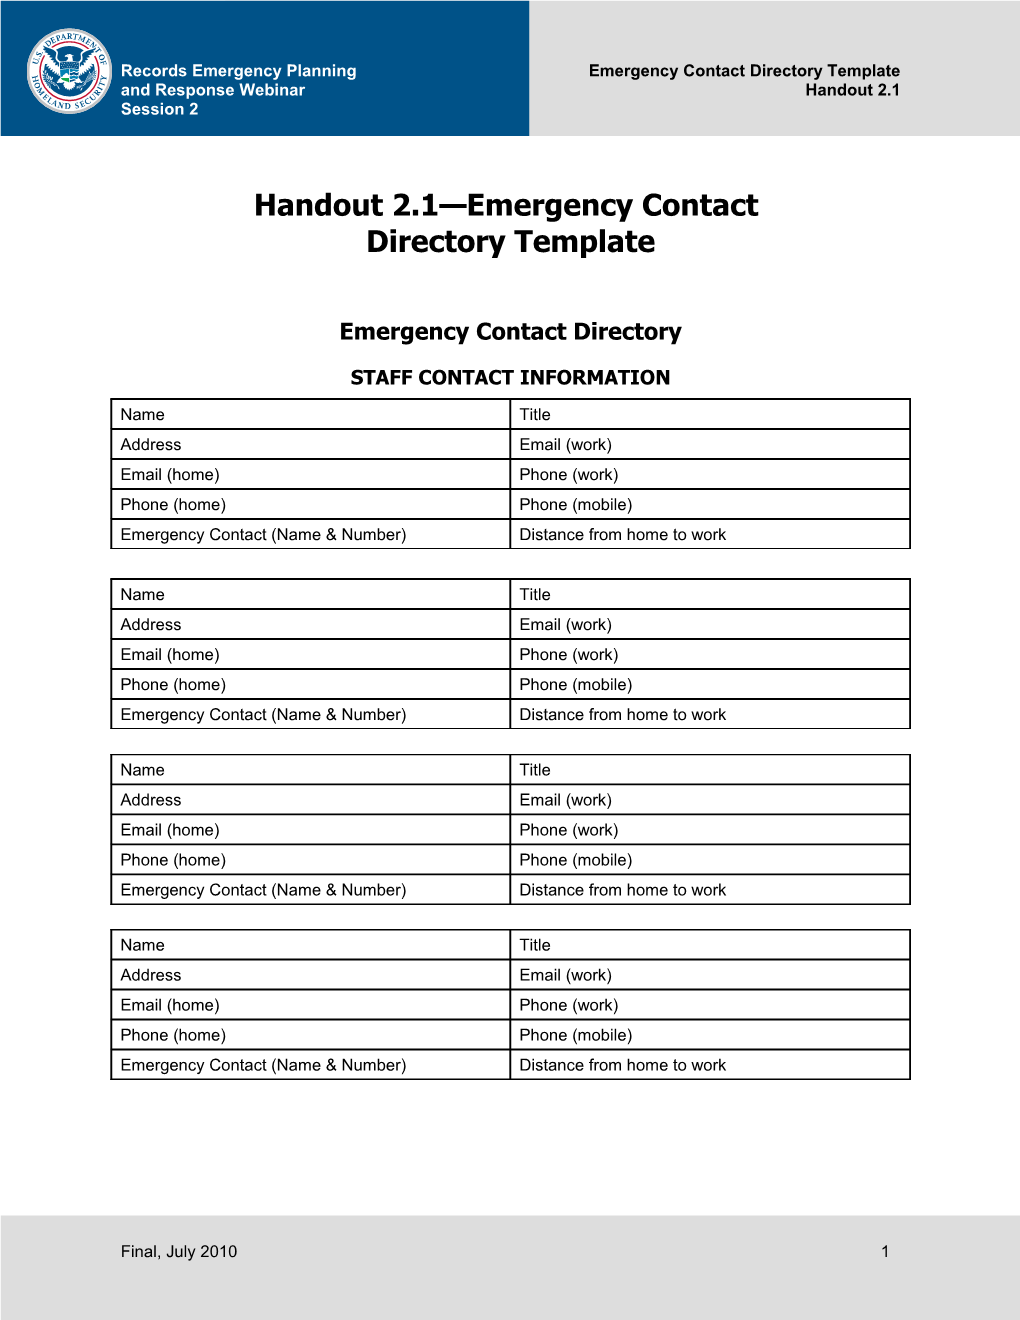 Handout 1.2: Emergency Contact Directory Template